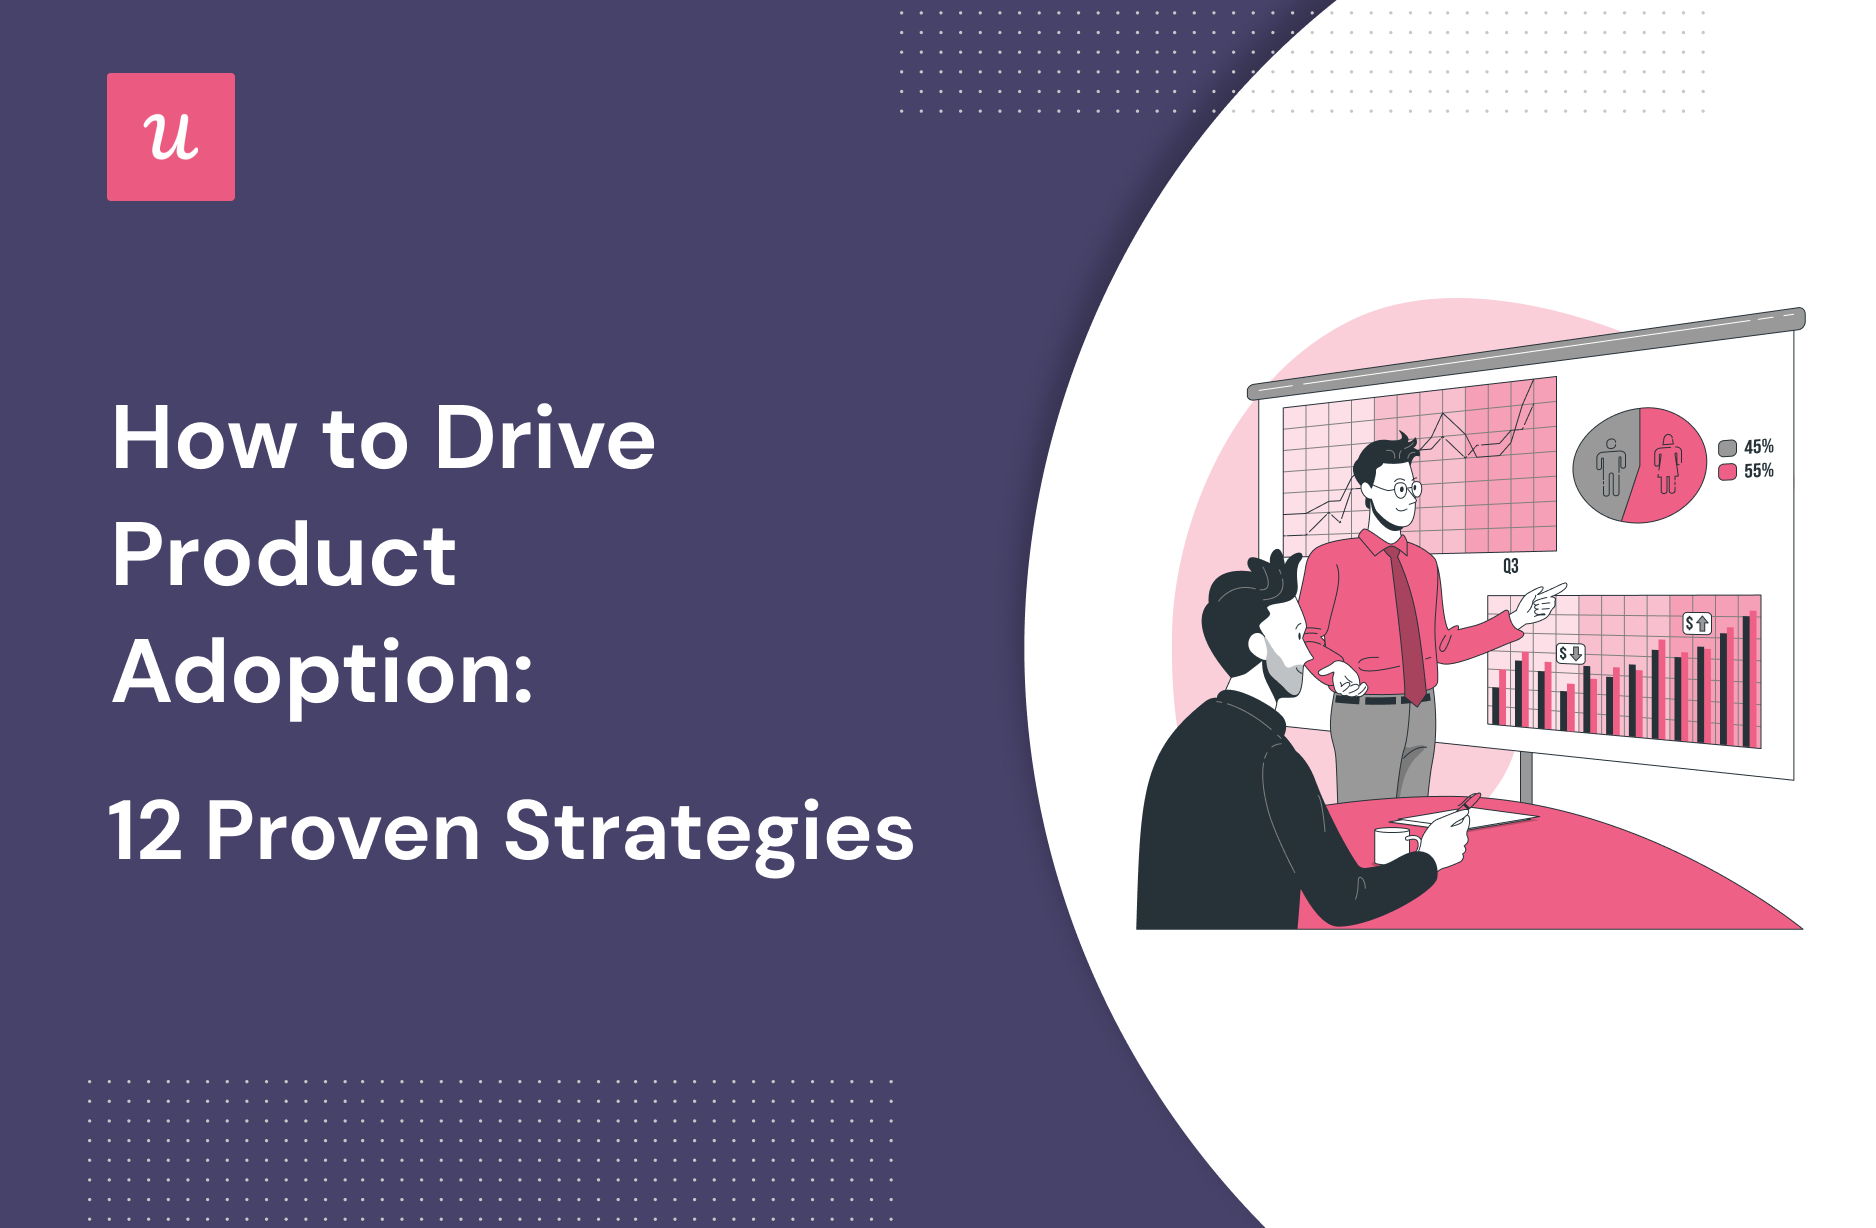 How to Drive Product Adoption: 12 Proven Strategies